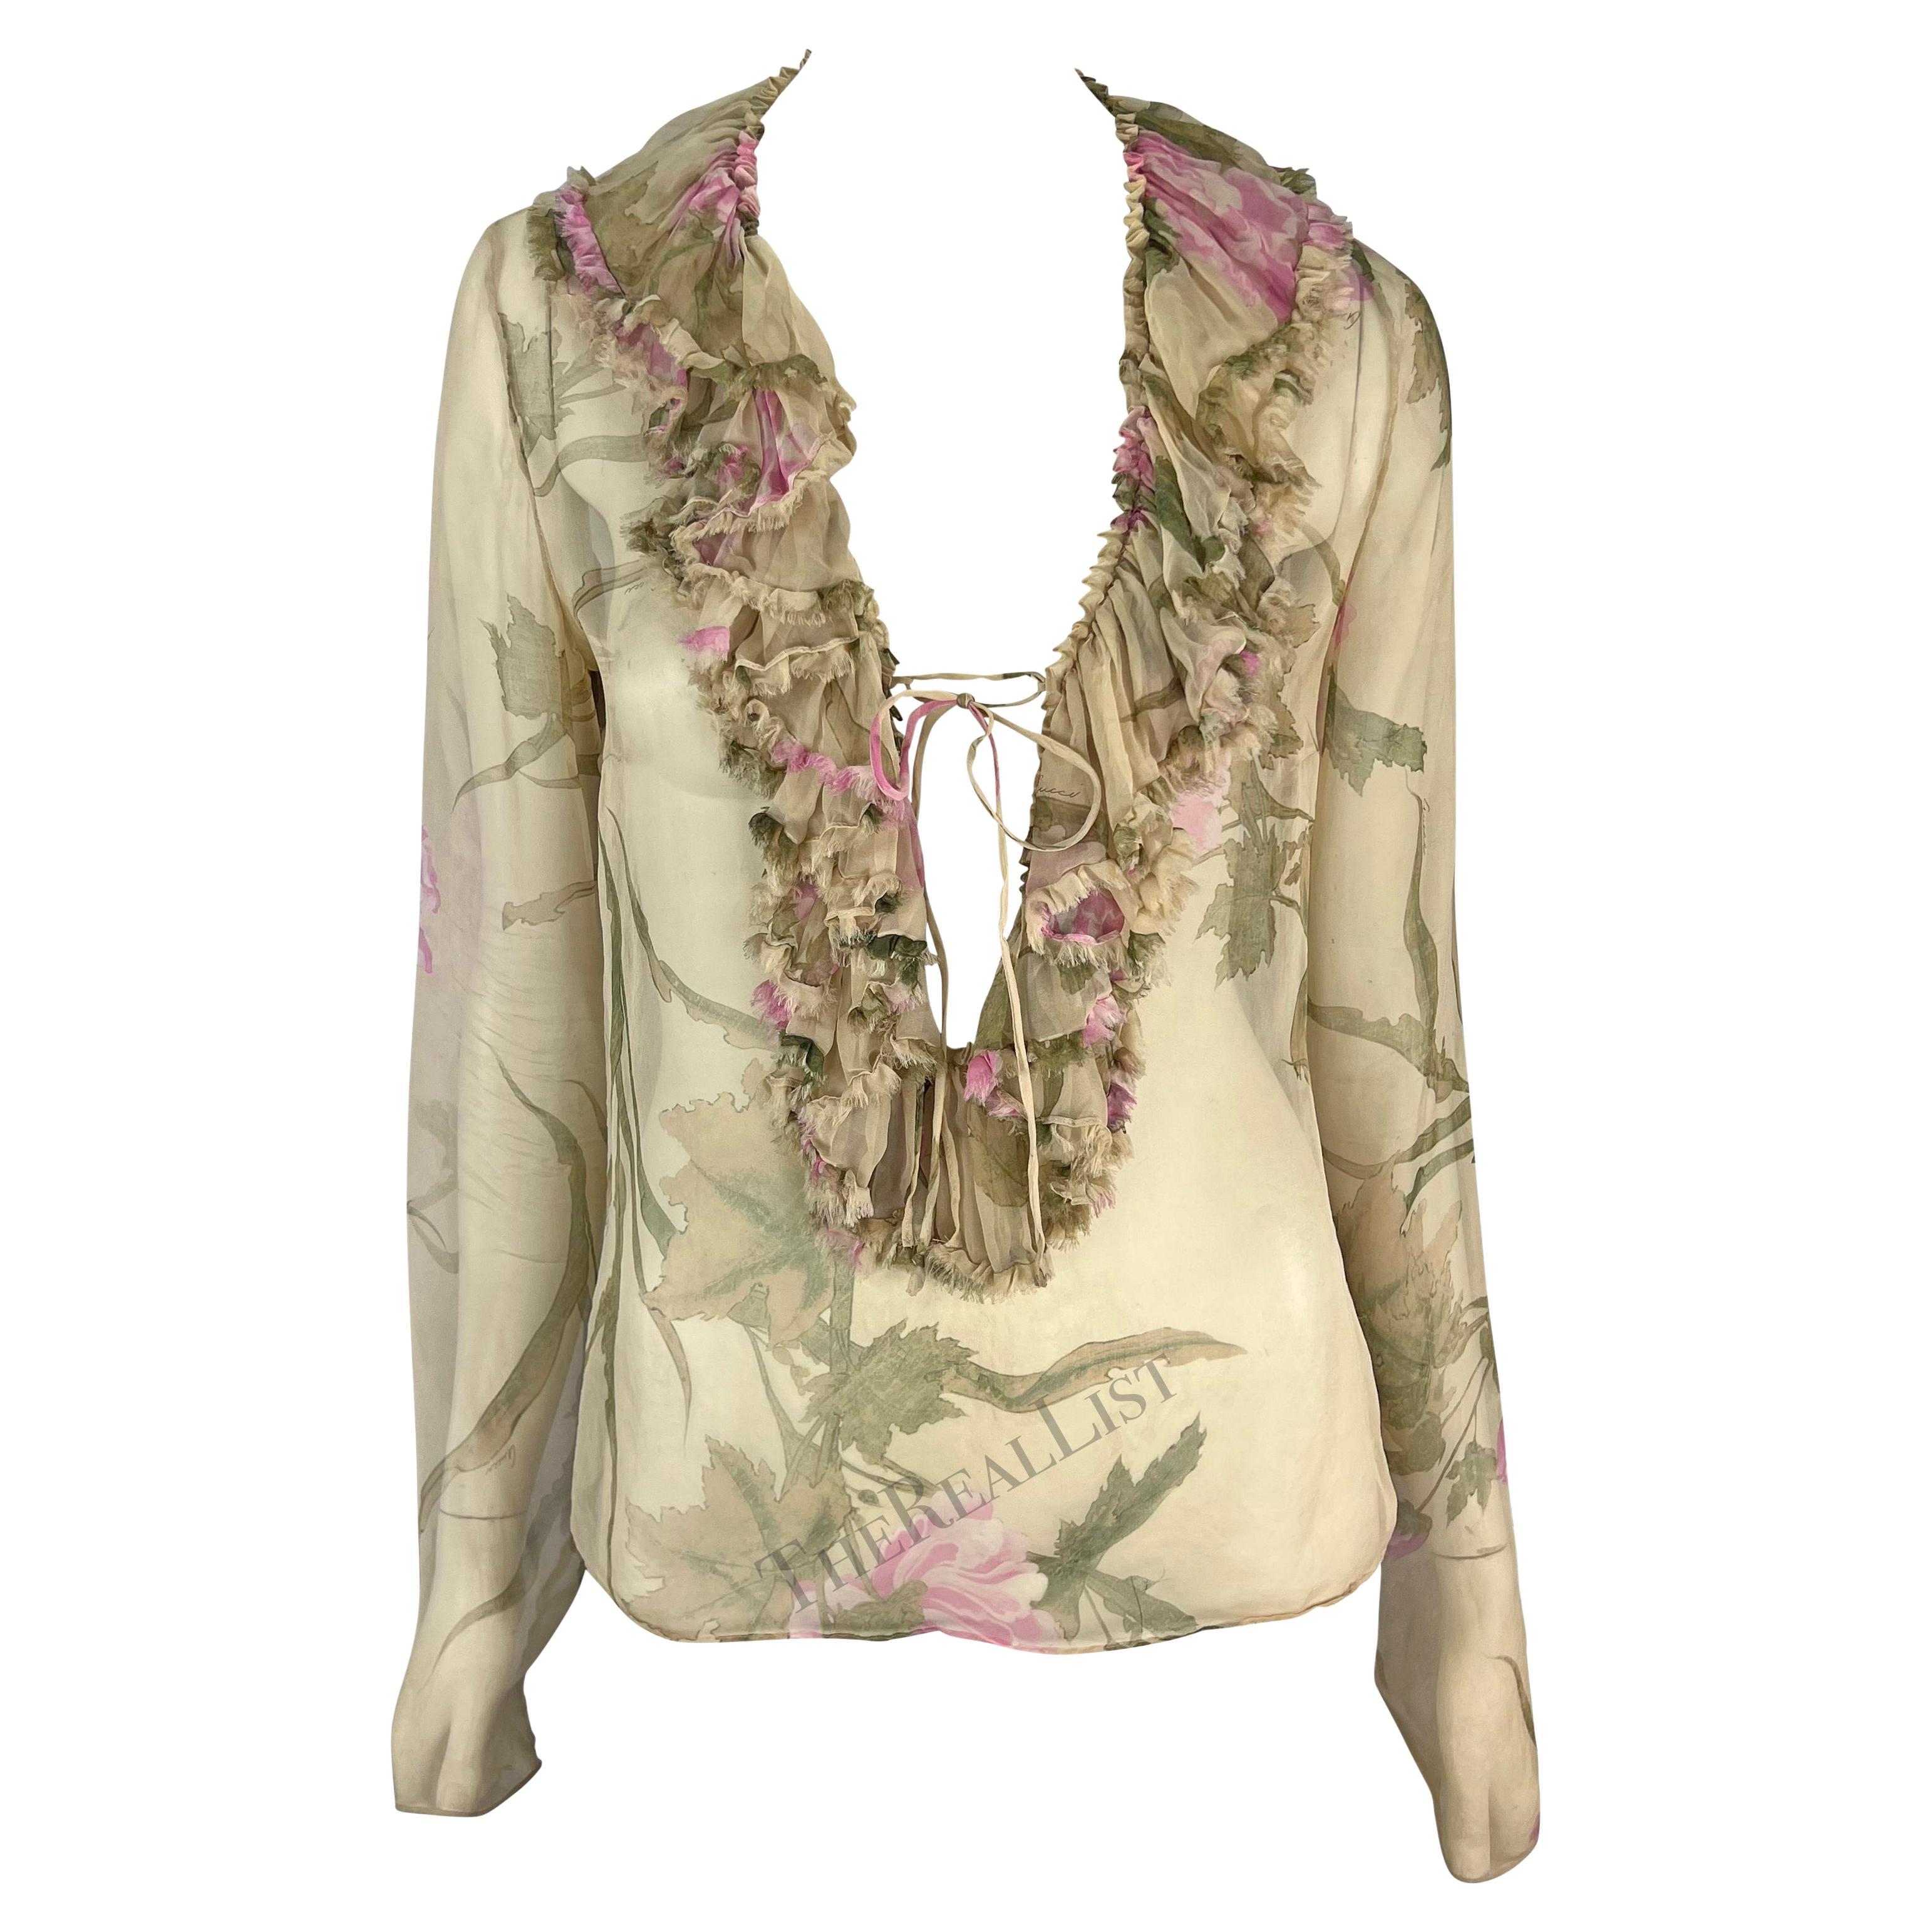 S/S 2003 Gucci by Tom Ford Tan Sheer Floral Ruffle Plunging Top For Sale